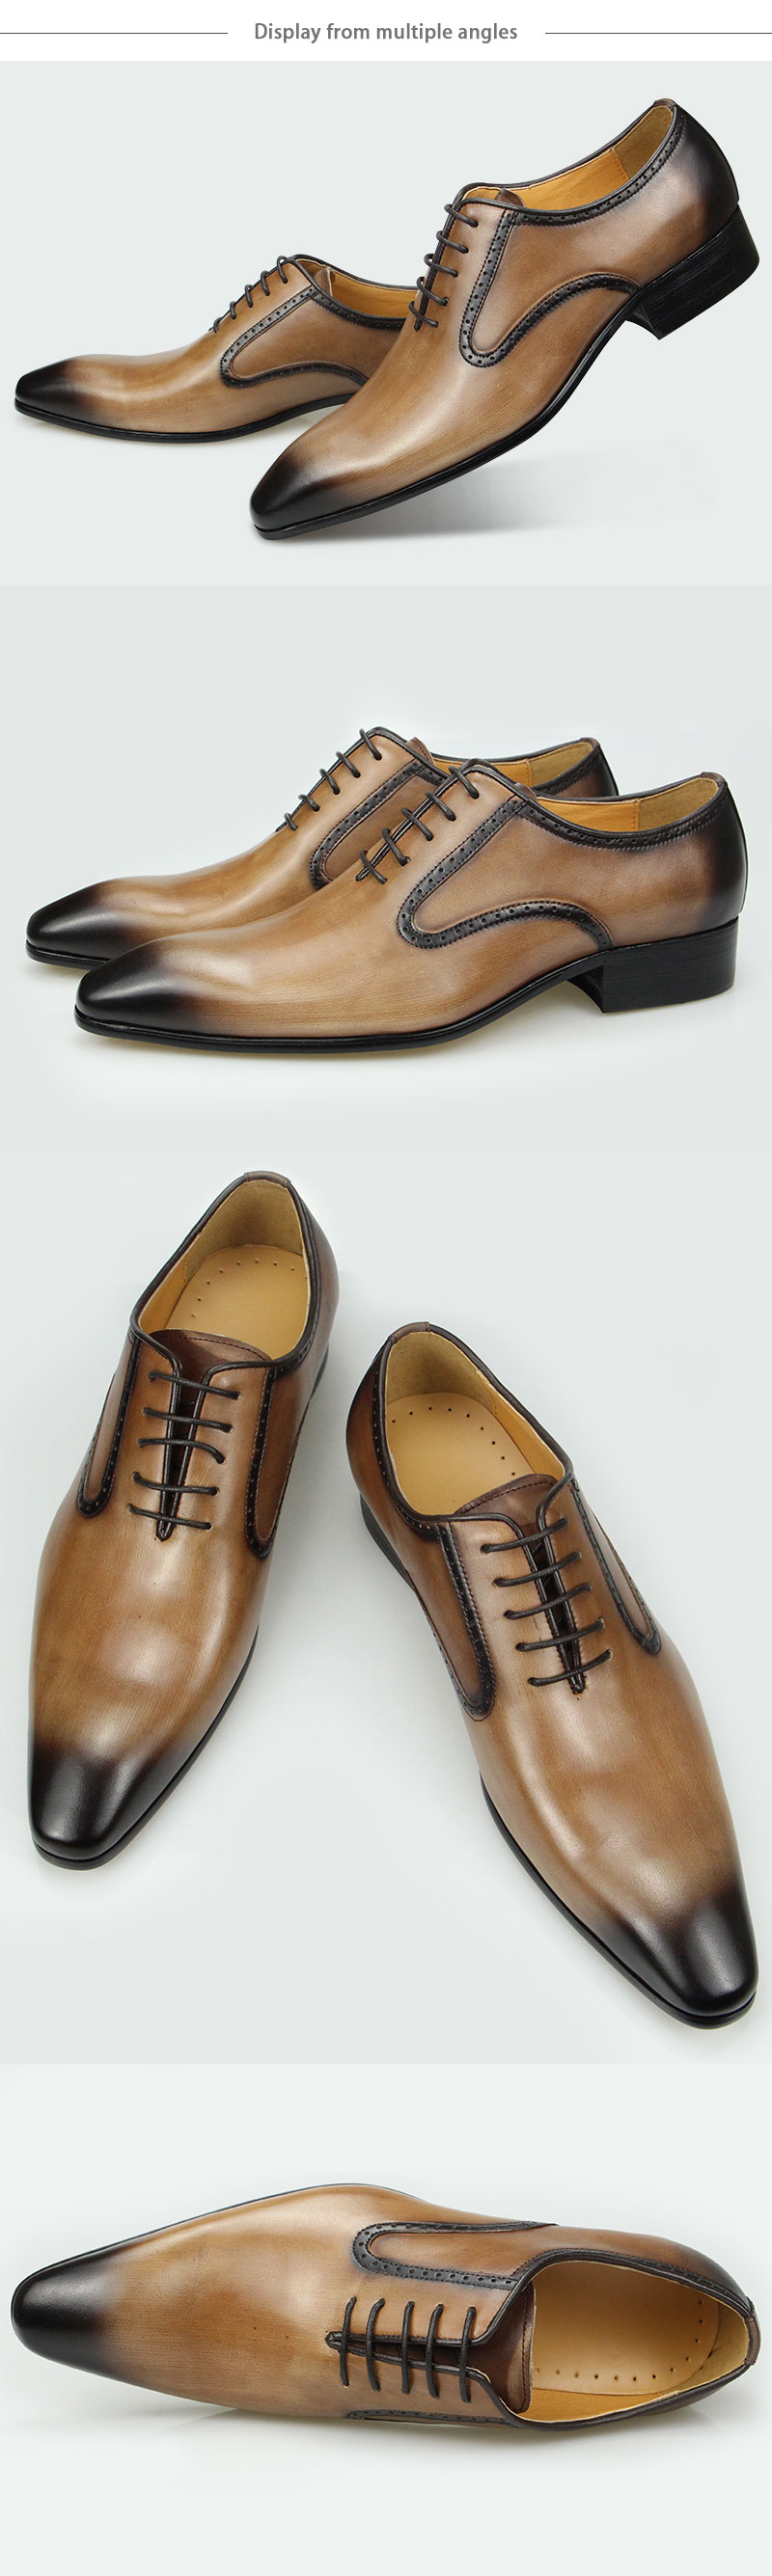 come4buy.com-Casual Oxford Shoes For Men